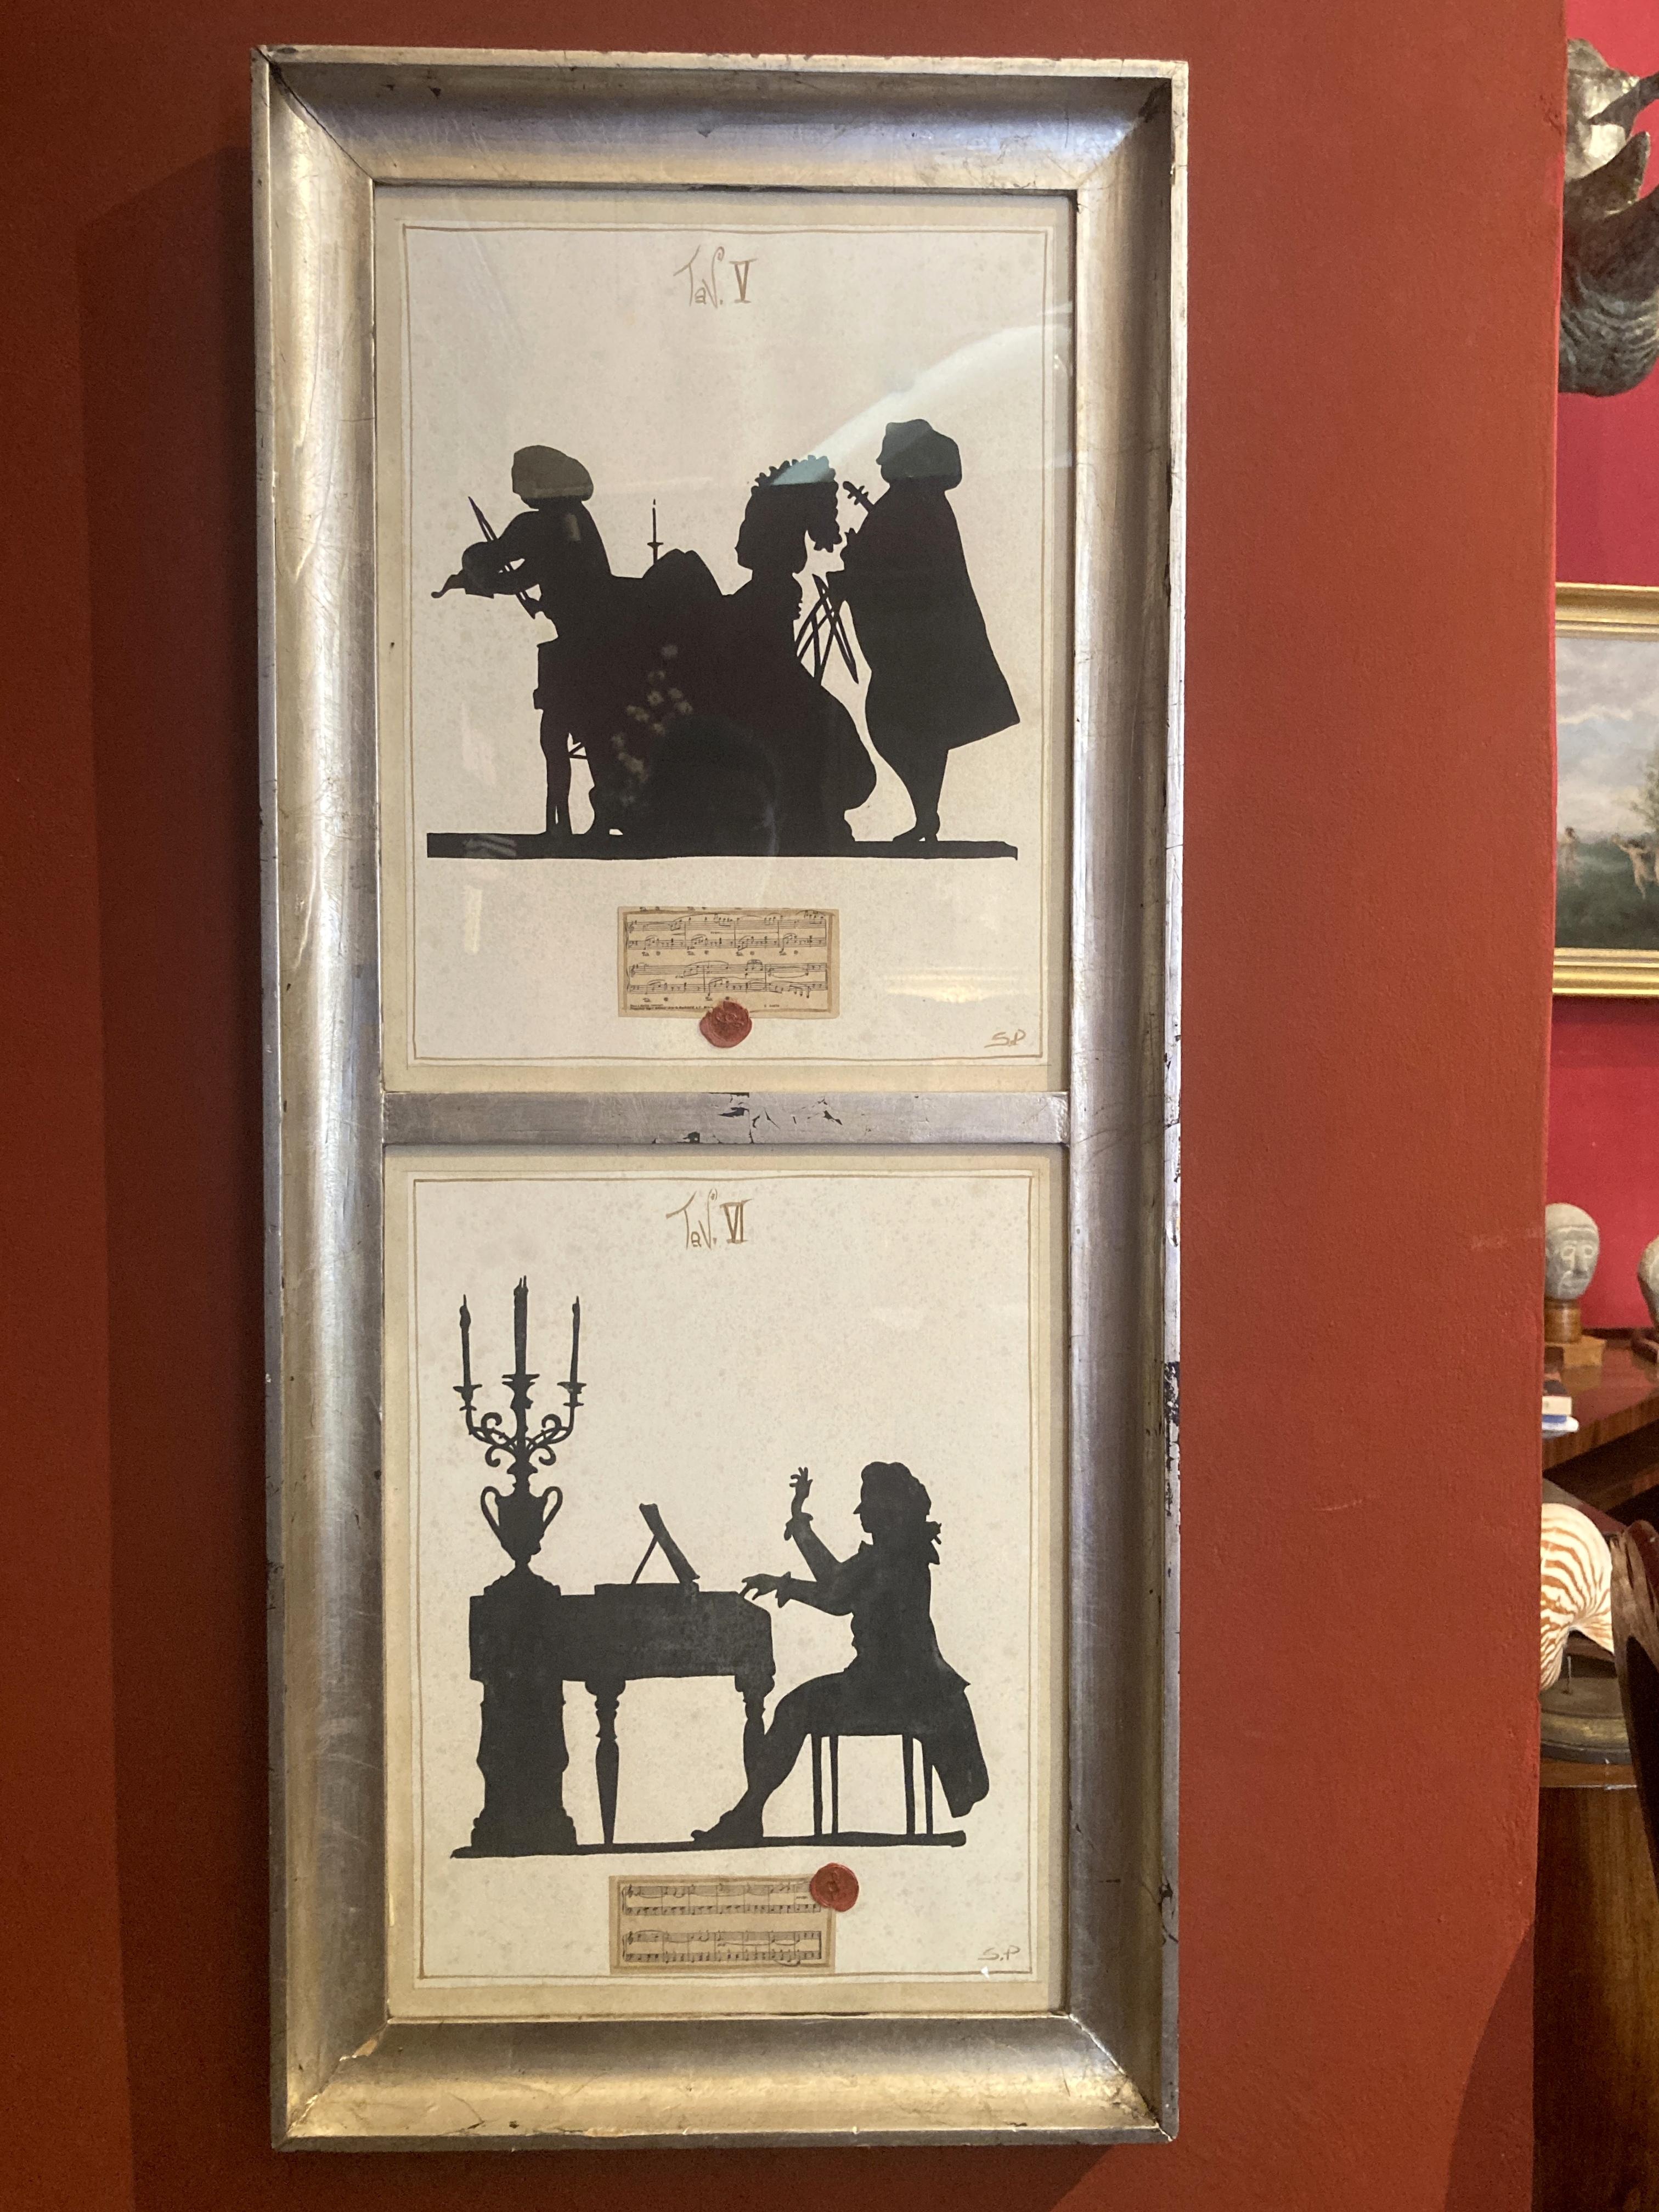 Two very pleasant musical themed silhouettes mixed media paintings. These lovely drawings are made of  ink and watercolor on paper enriched by a musical score fixed with a red lacquer wax mold. One figure represents a string trio, the other a